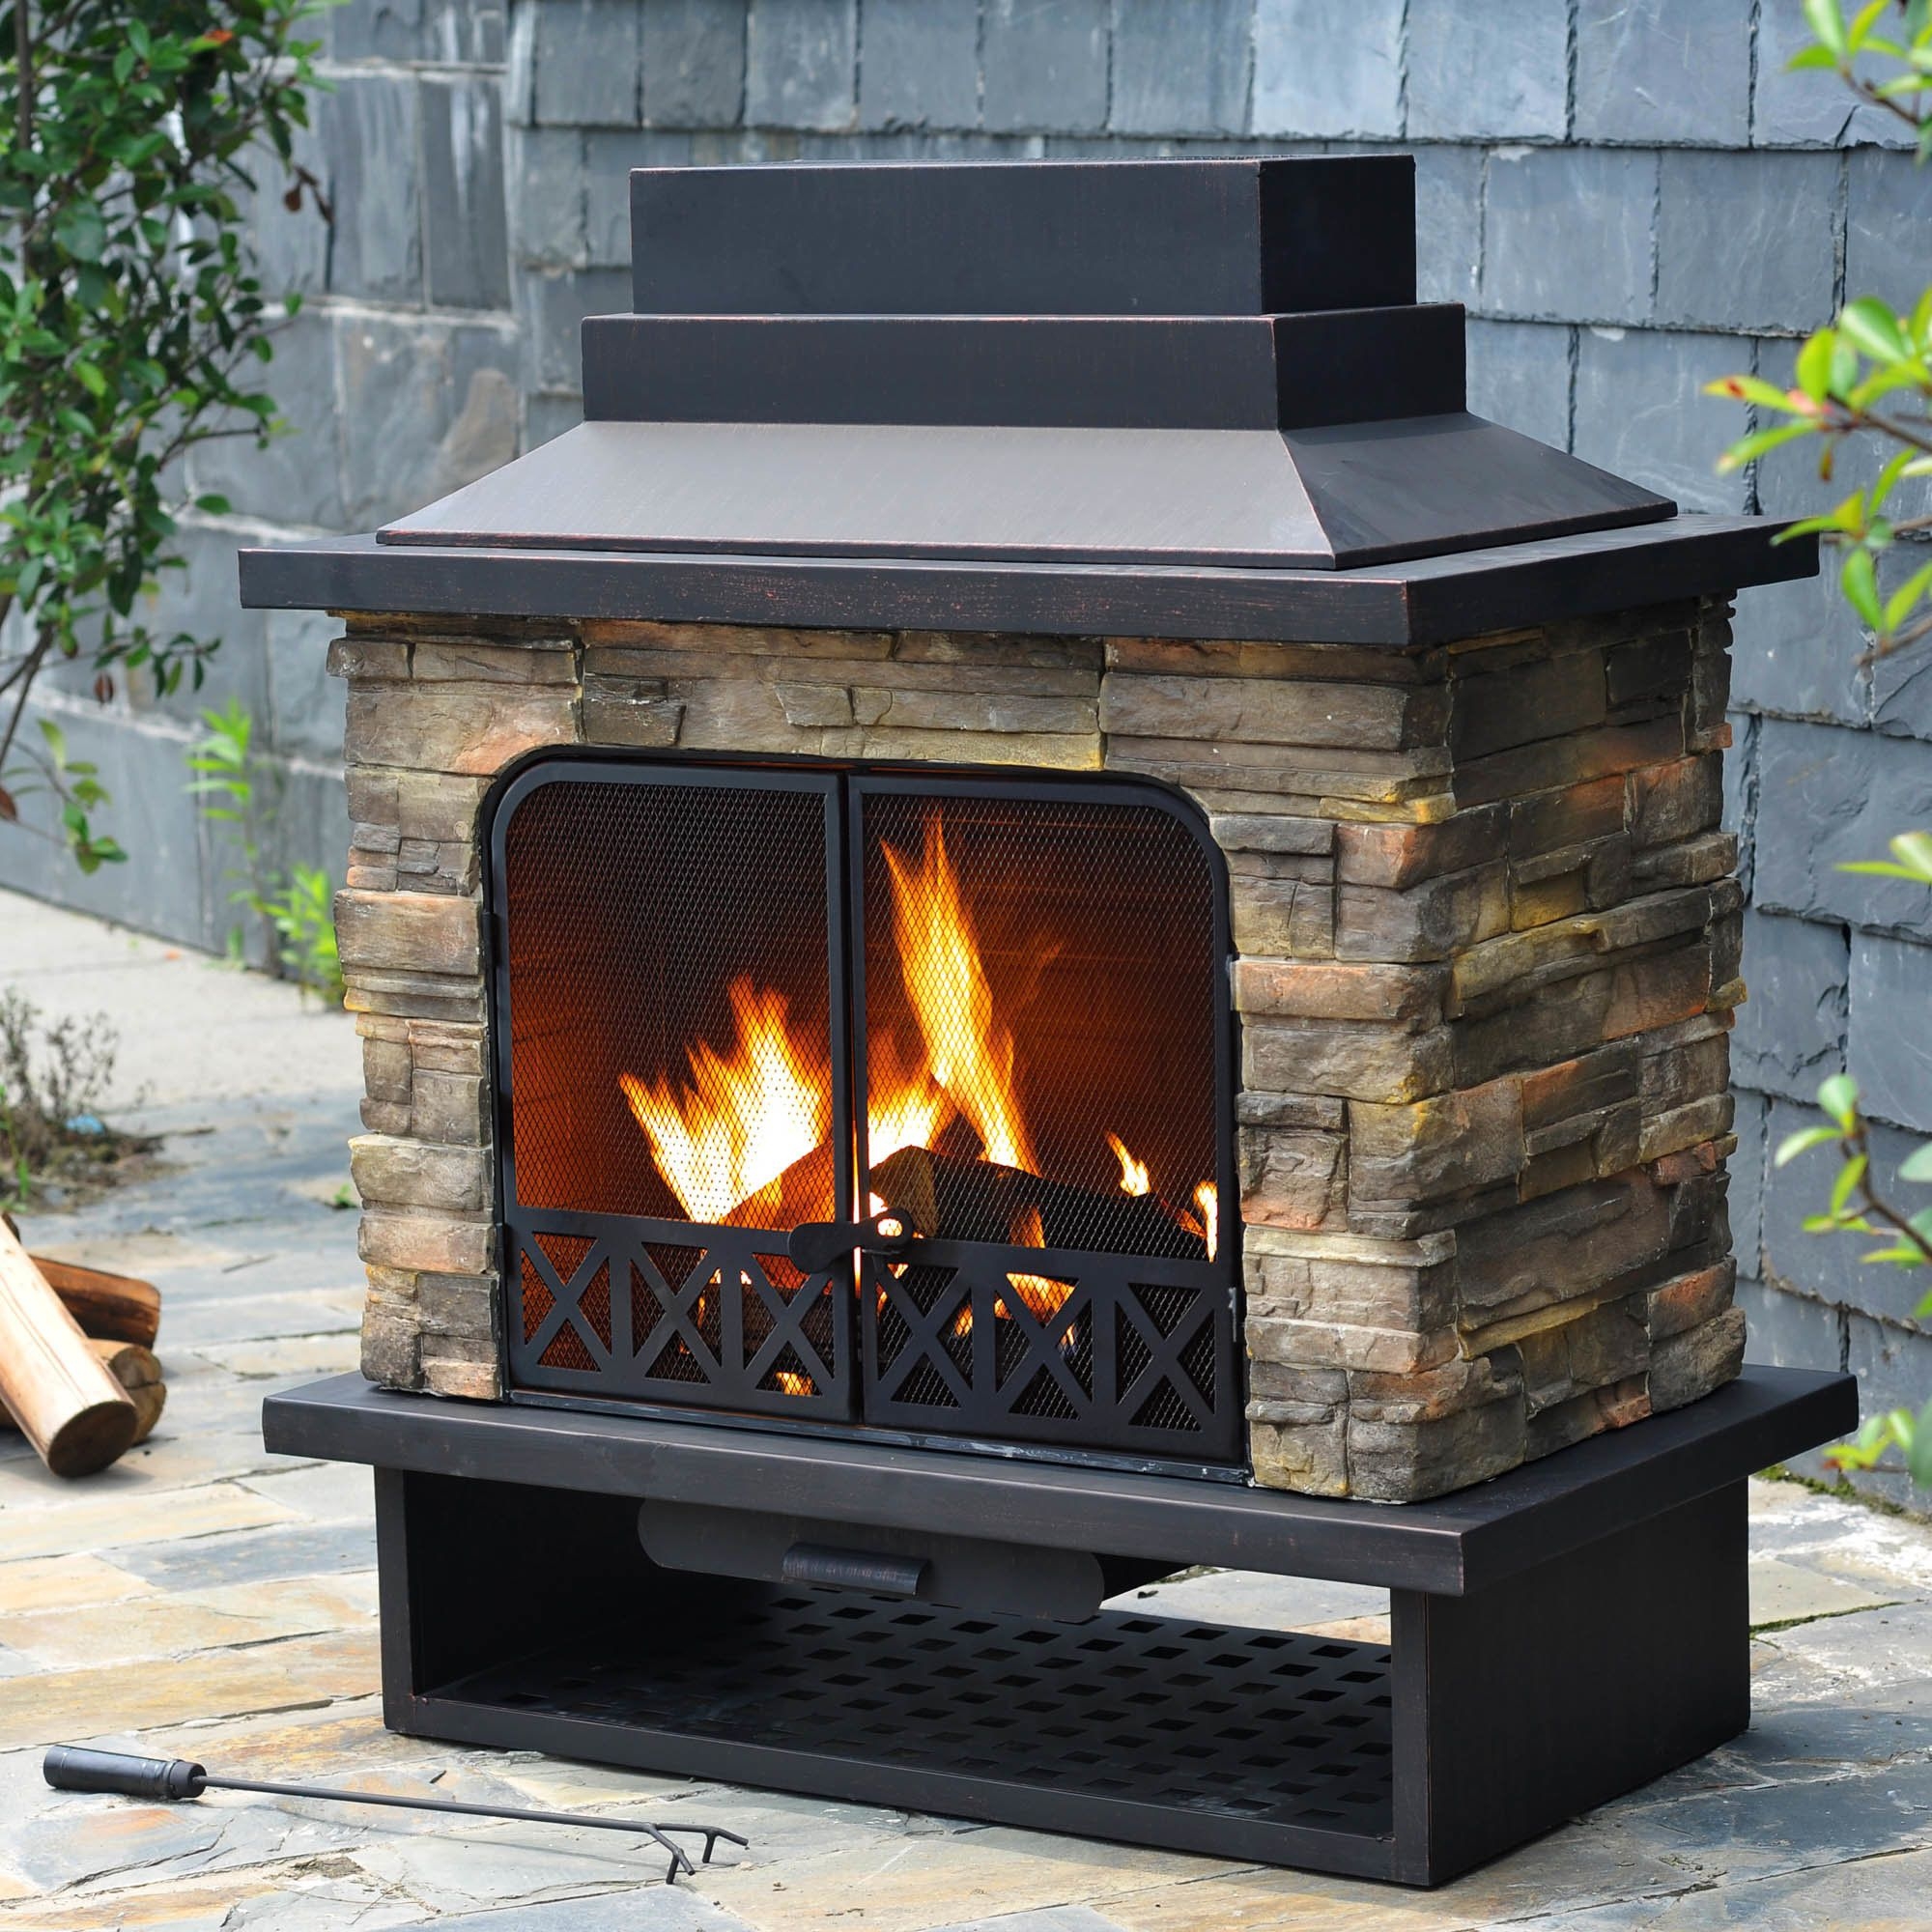 Outdoor Electric Fireplace Visualhunt, Outdoor Electric Fireplace With Heat